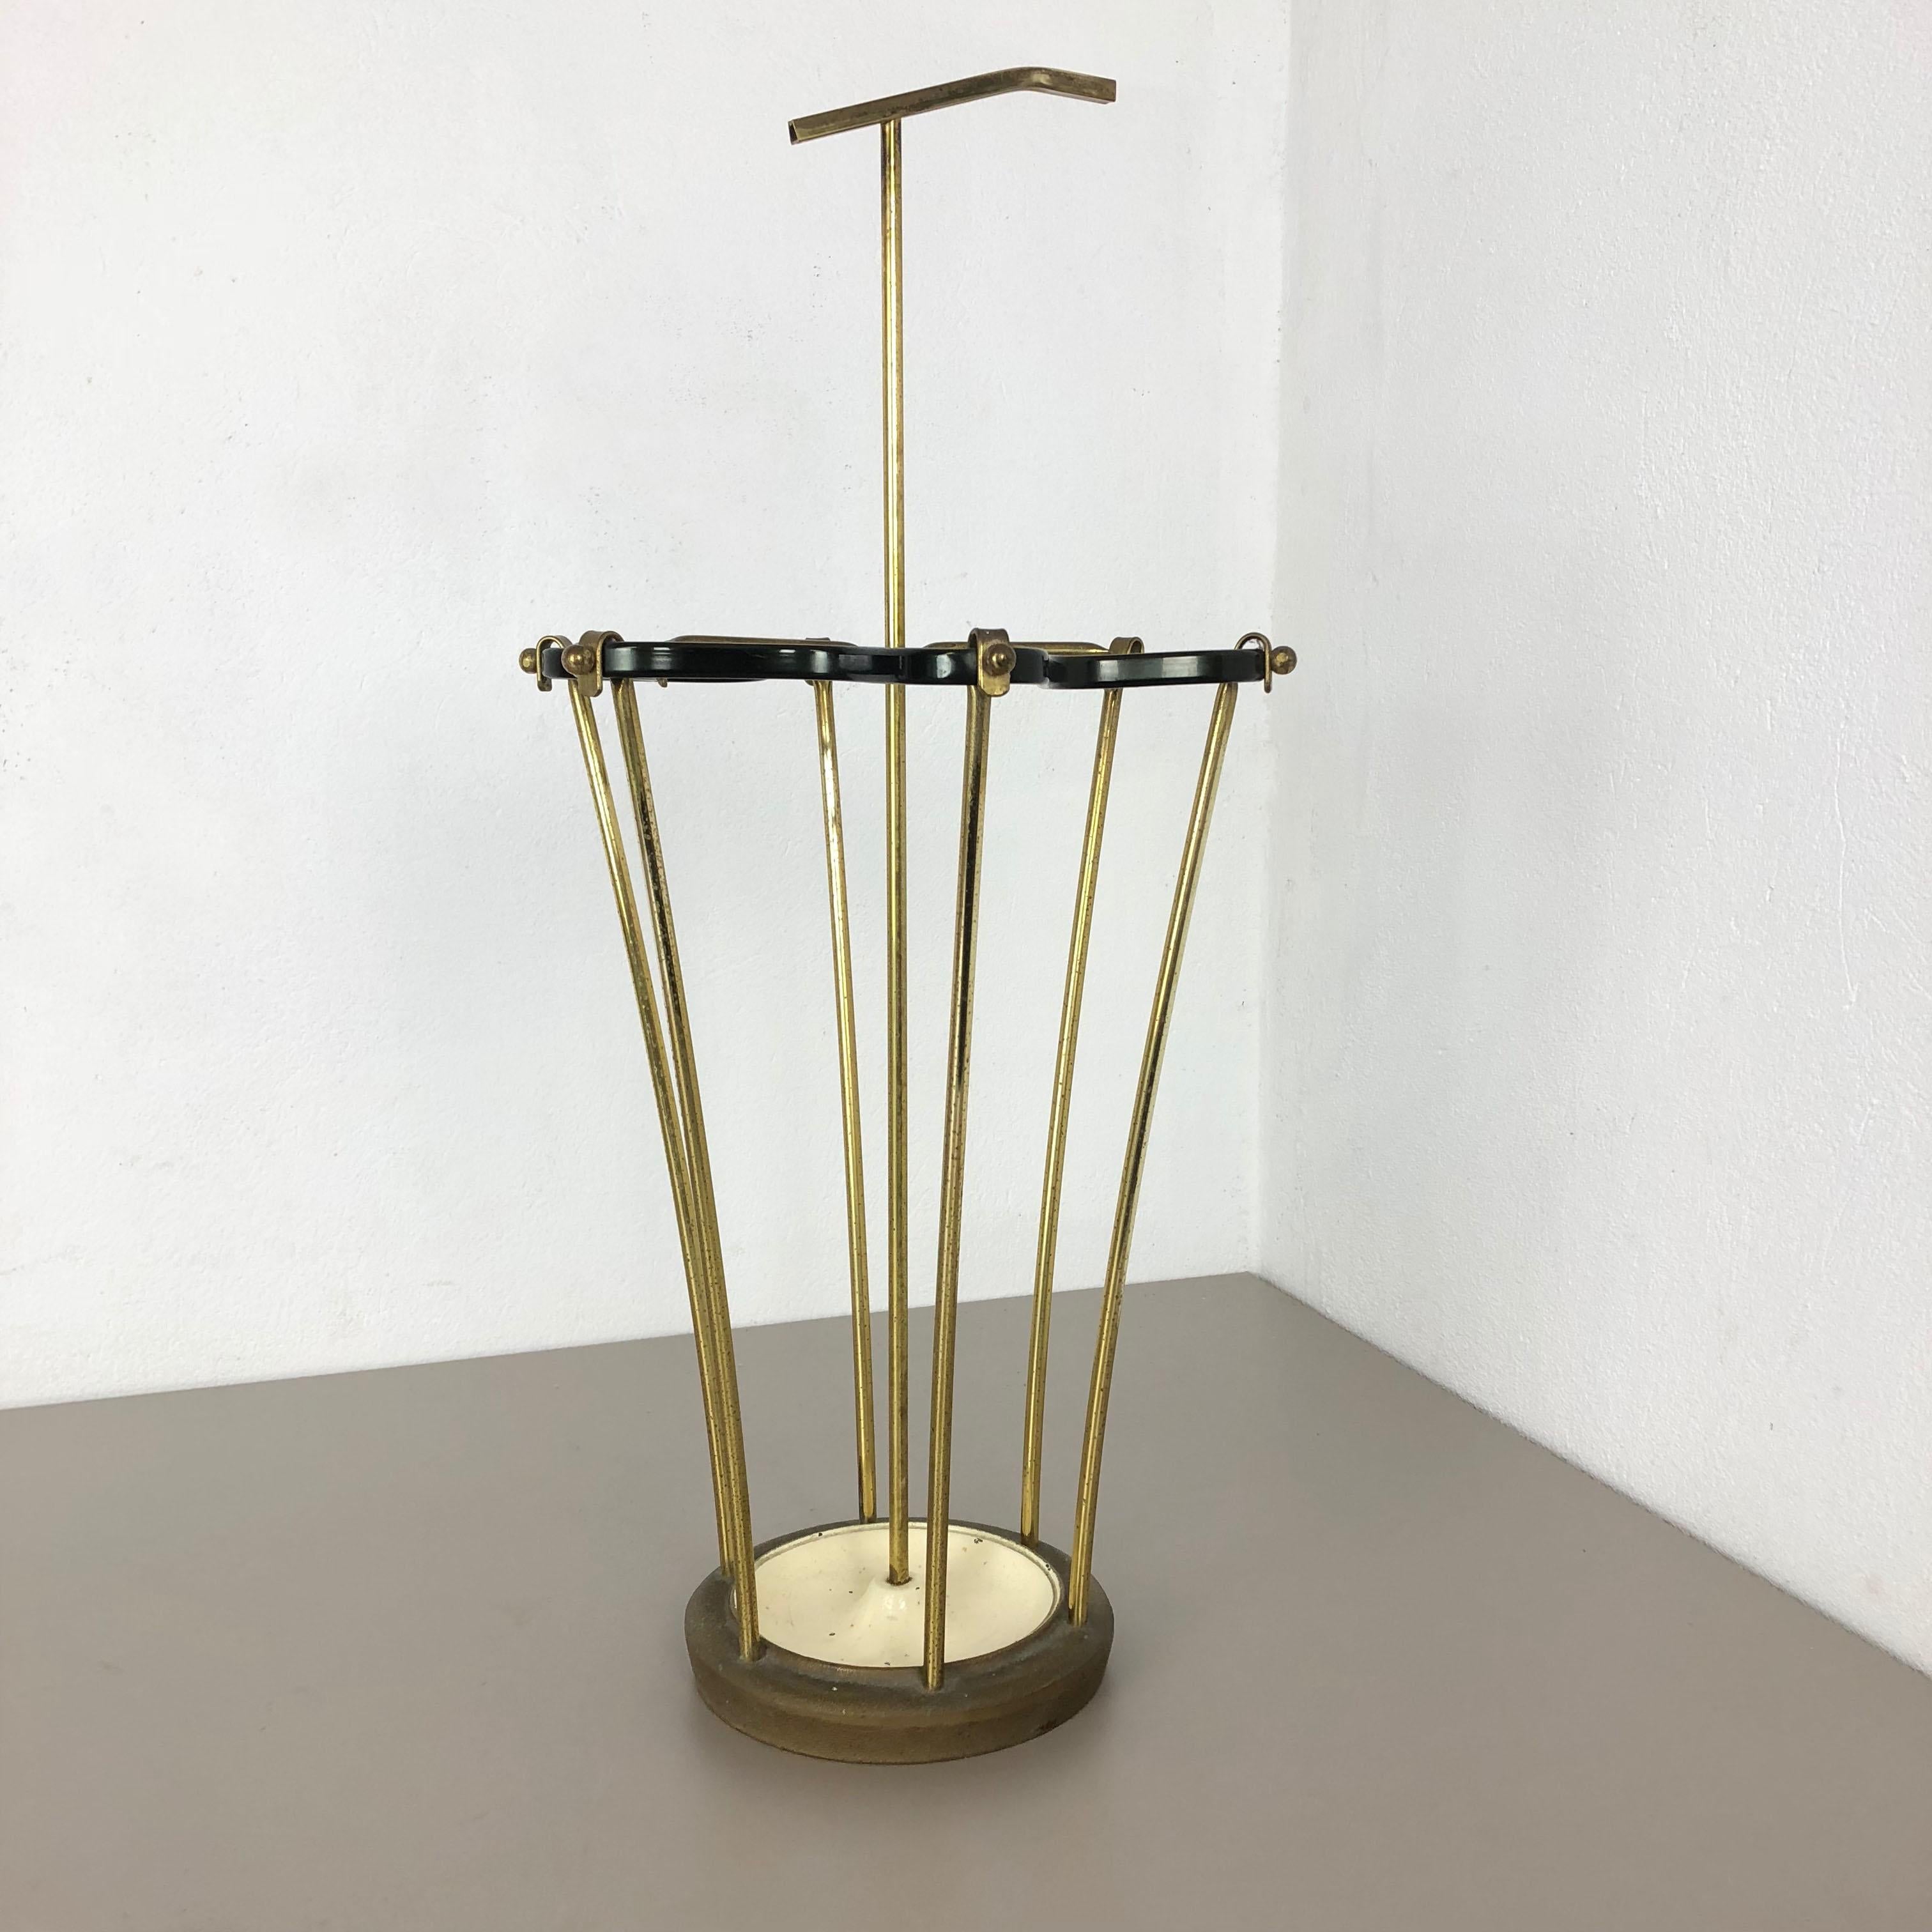 Article:

Bauhaus umbrella stand


Origin:

France


Age:

1950s


This original vintage Bauhaus style umbrella stand was produced in the 1950s in France. The bottom dipping base is made of cast iron, the upright standing elements and